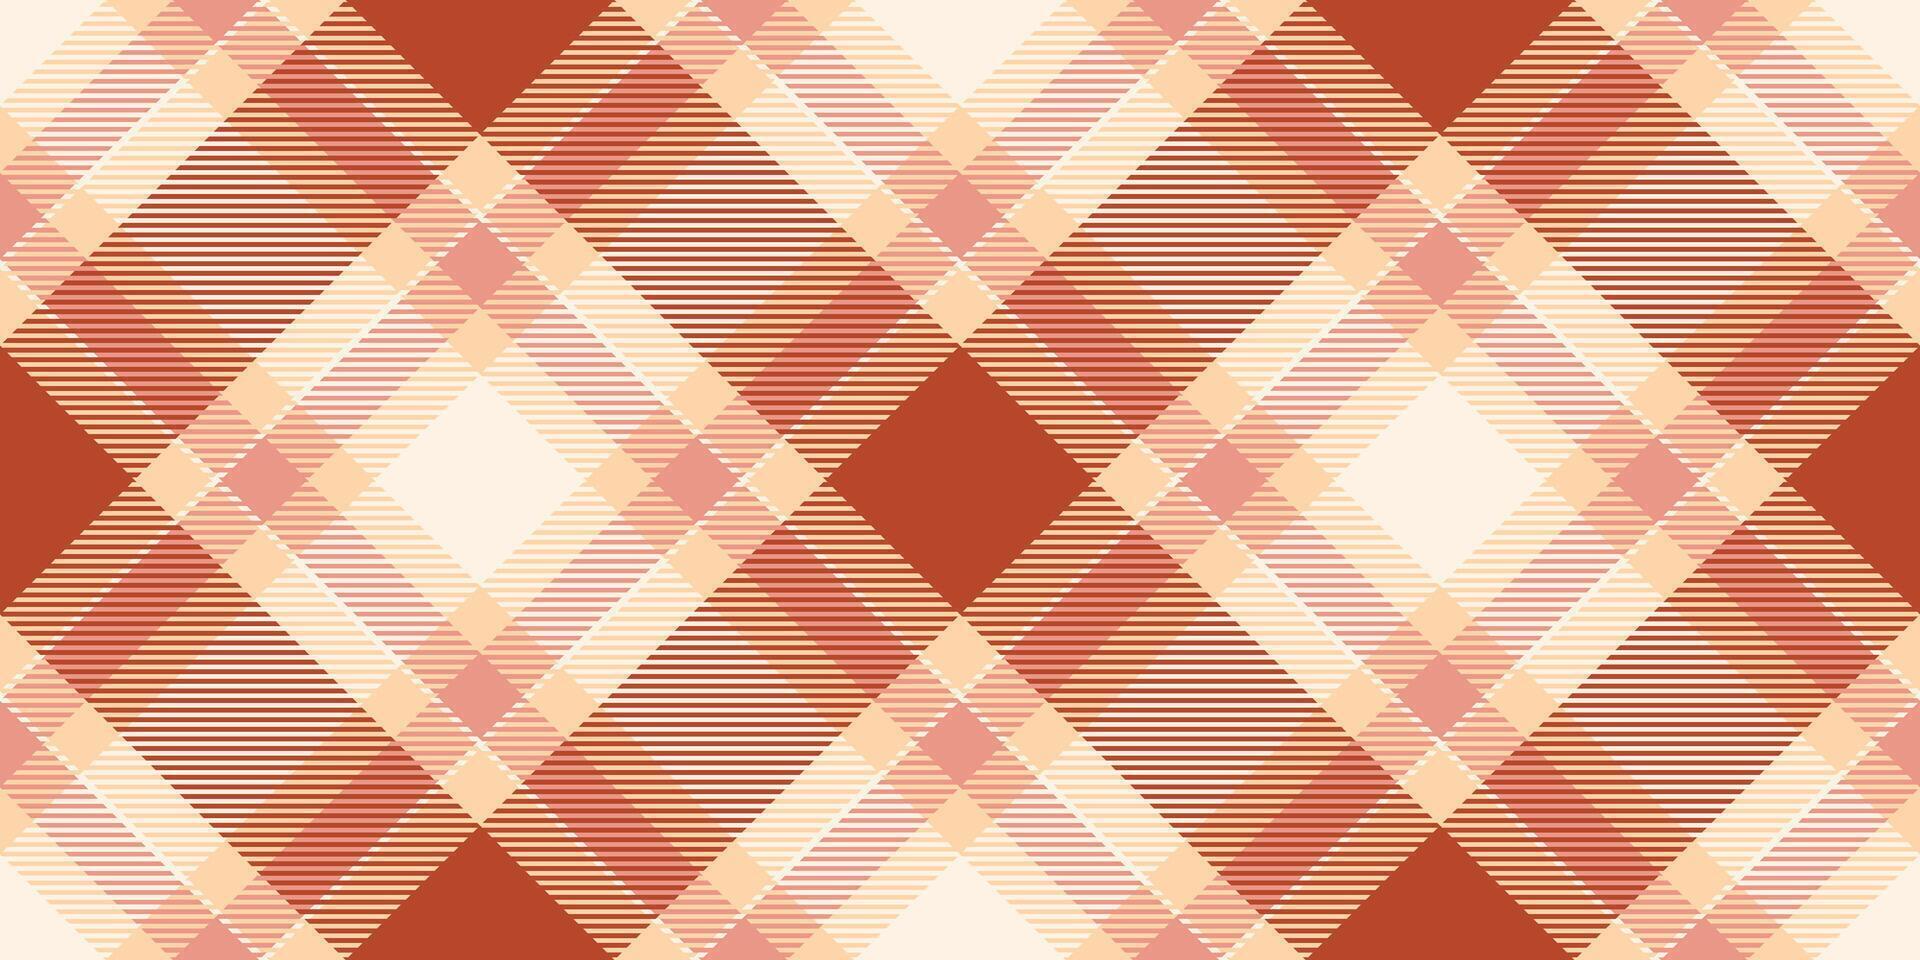 Festive textile tartan seamless, other pattern fabric. Scratched texture plaid background check in red and orange colors. vector